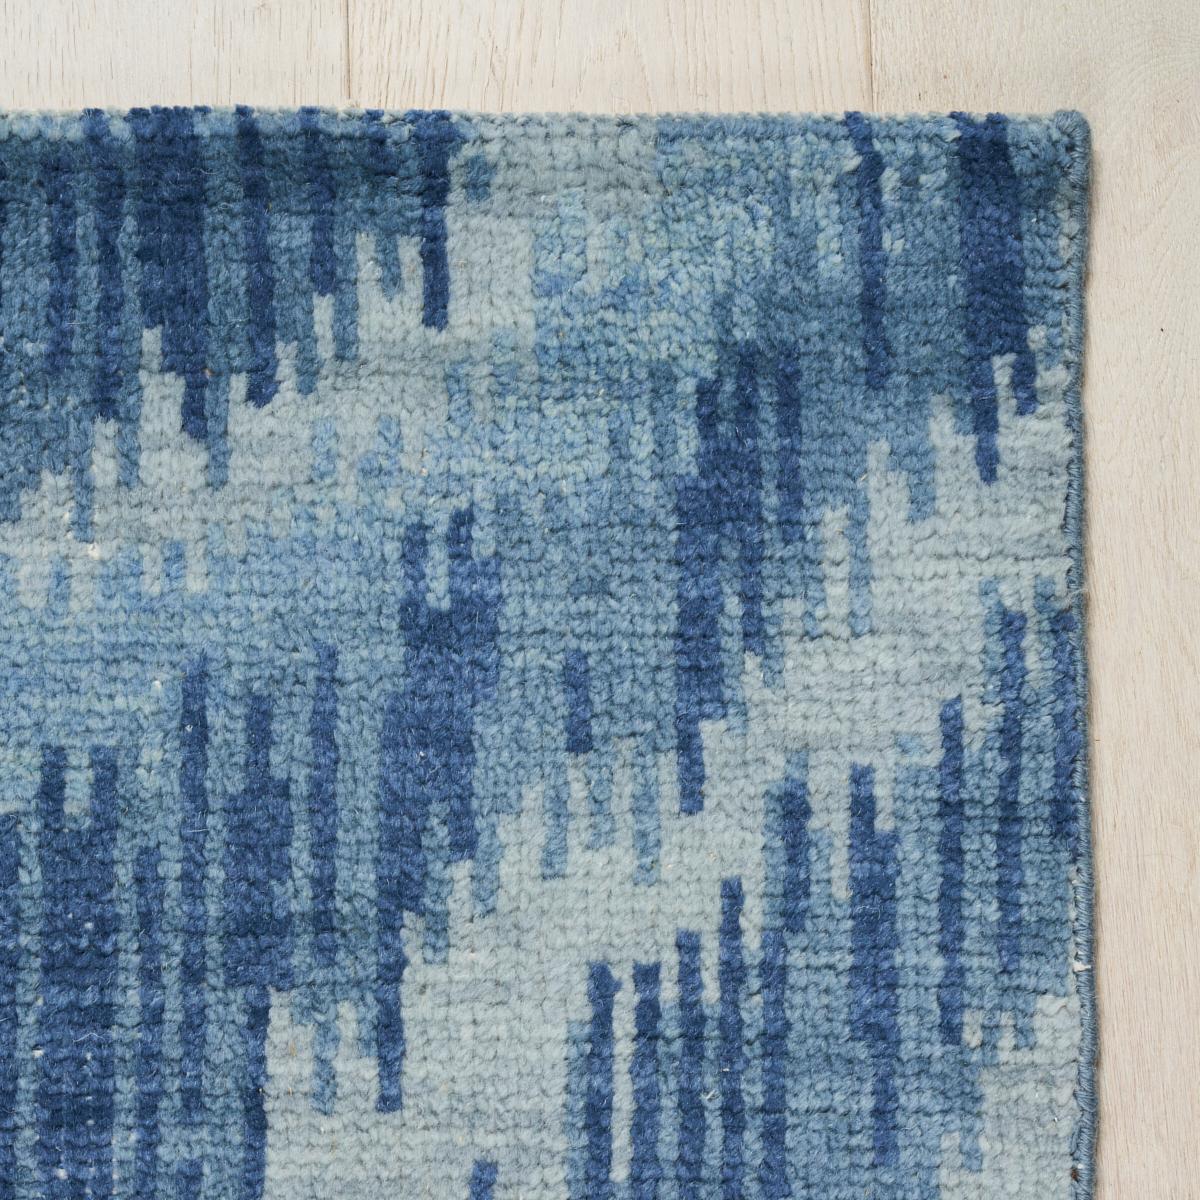  A tonal, undulating pattern inspired by classic bargello, Venetian Flame Stitch is a timeless rug design that is equally at home in modern and traditional interiors. With its soft stripe effect and hand-knotted wool-cotton construction, this